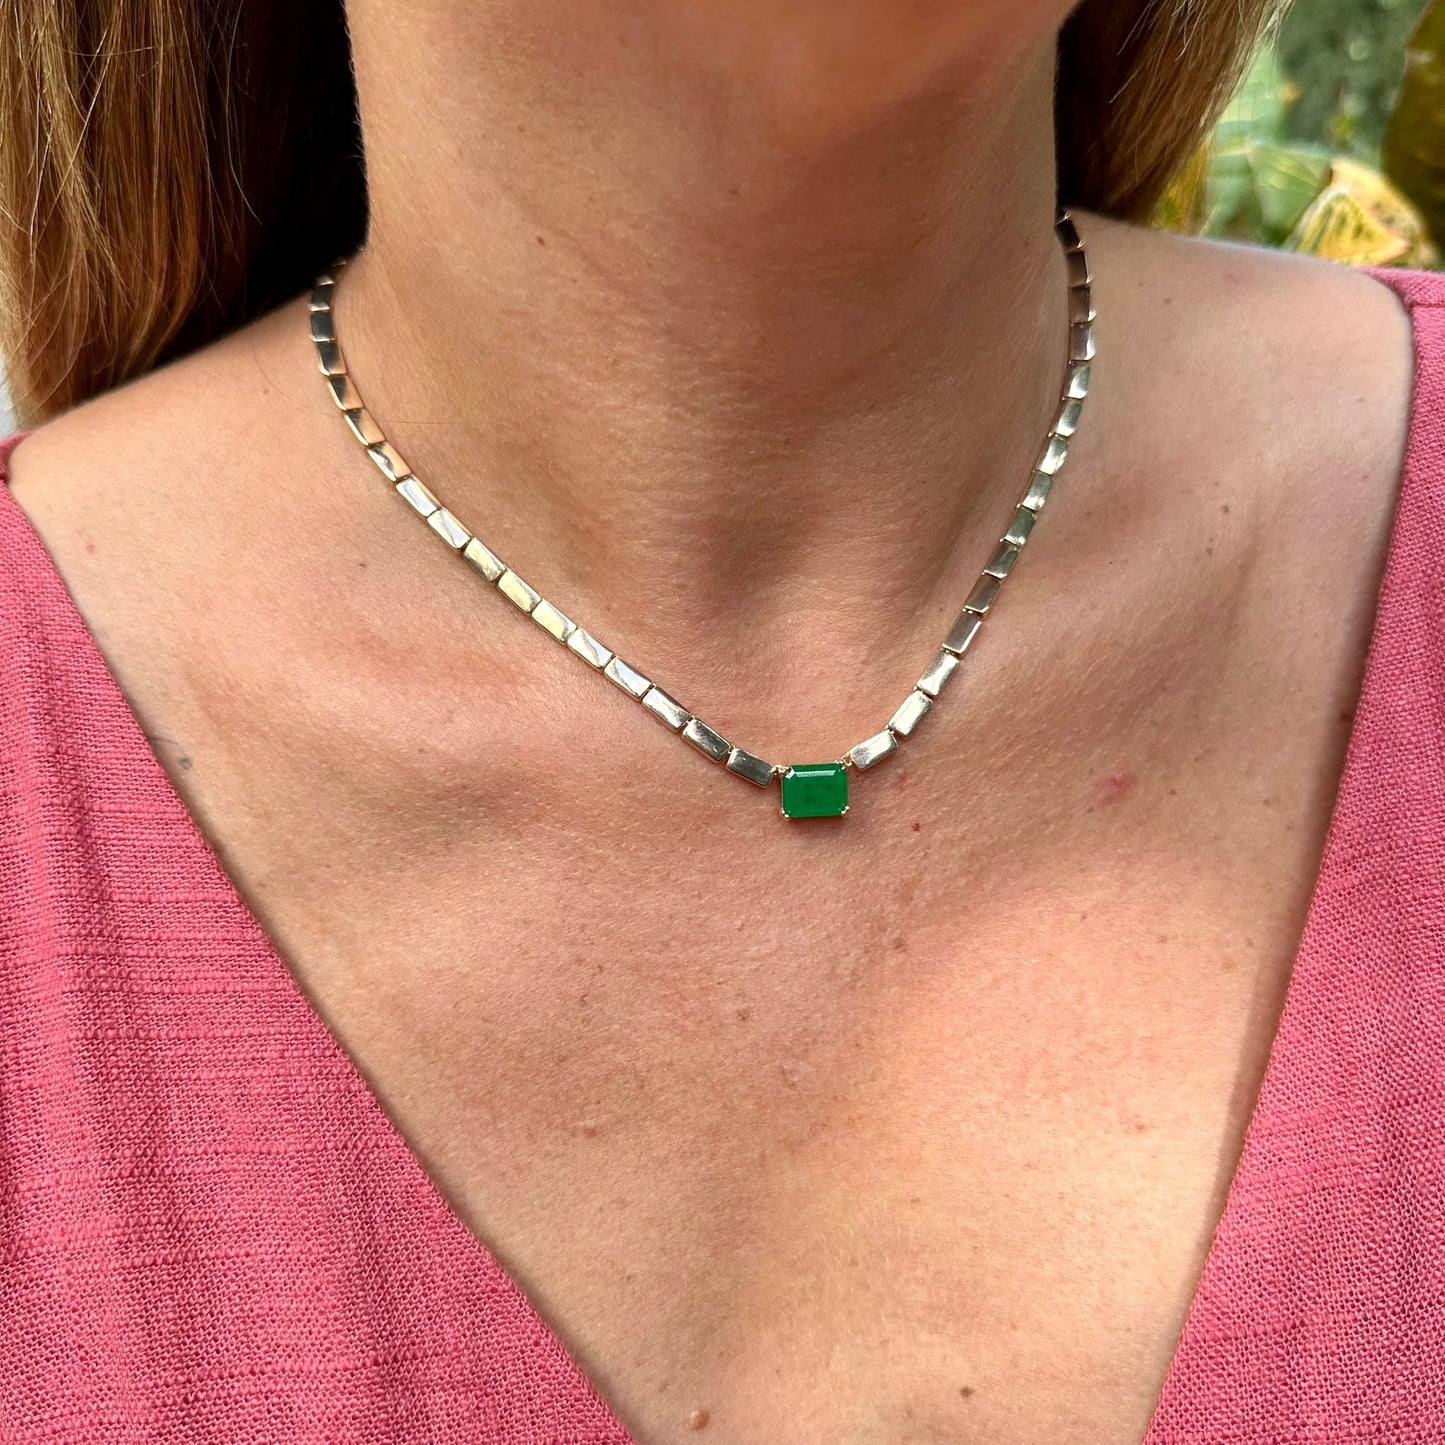 Positano Necklace in Sterling Silver 925